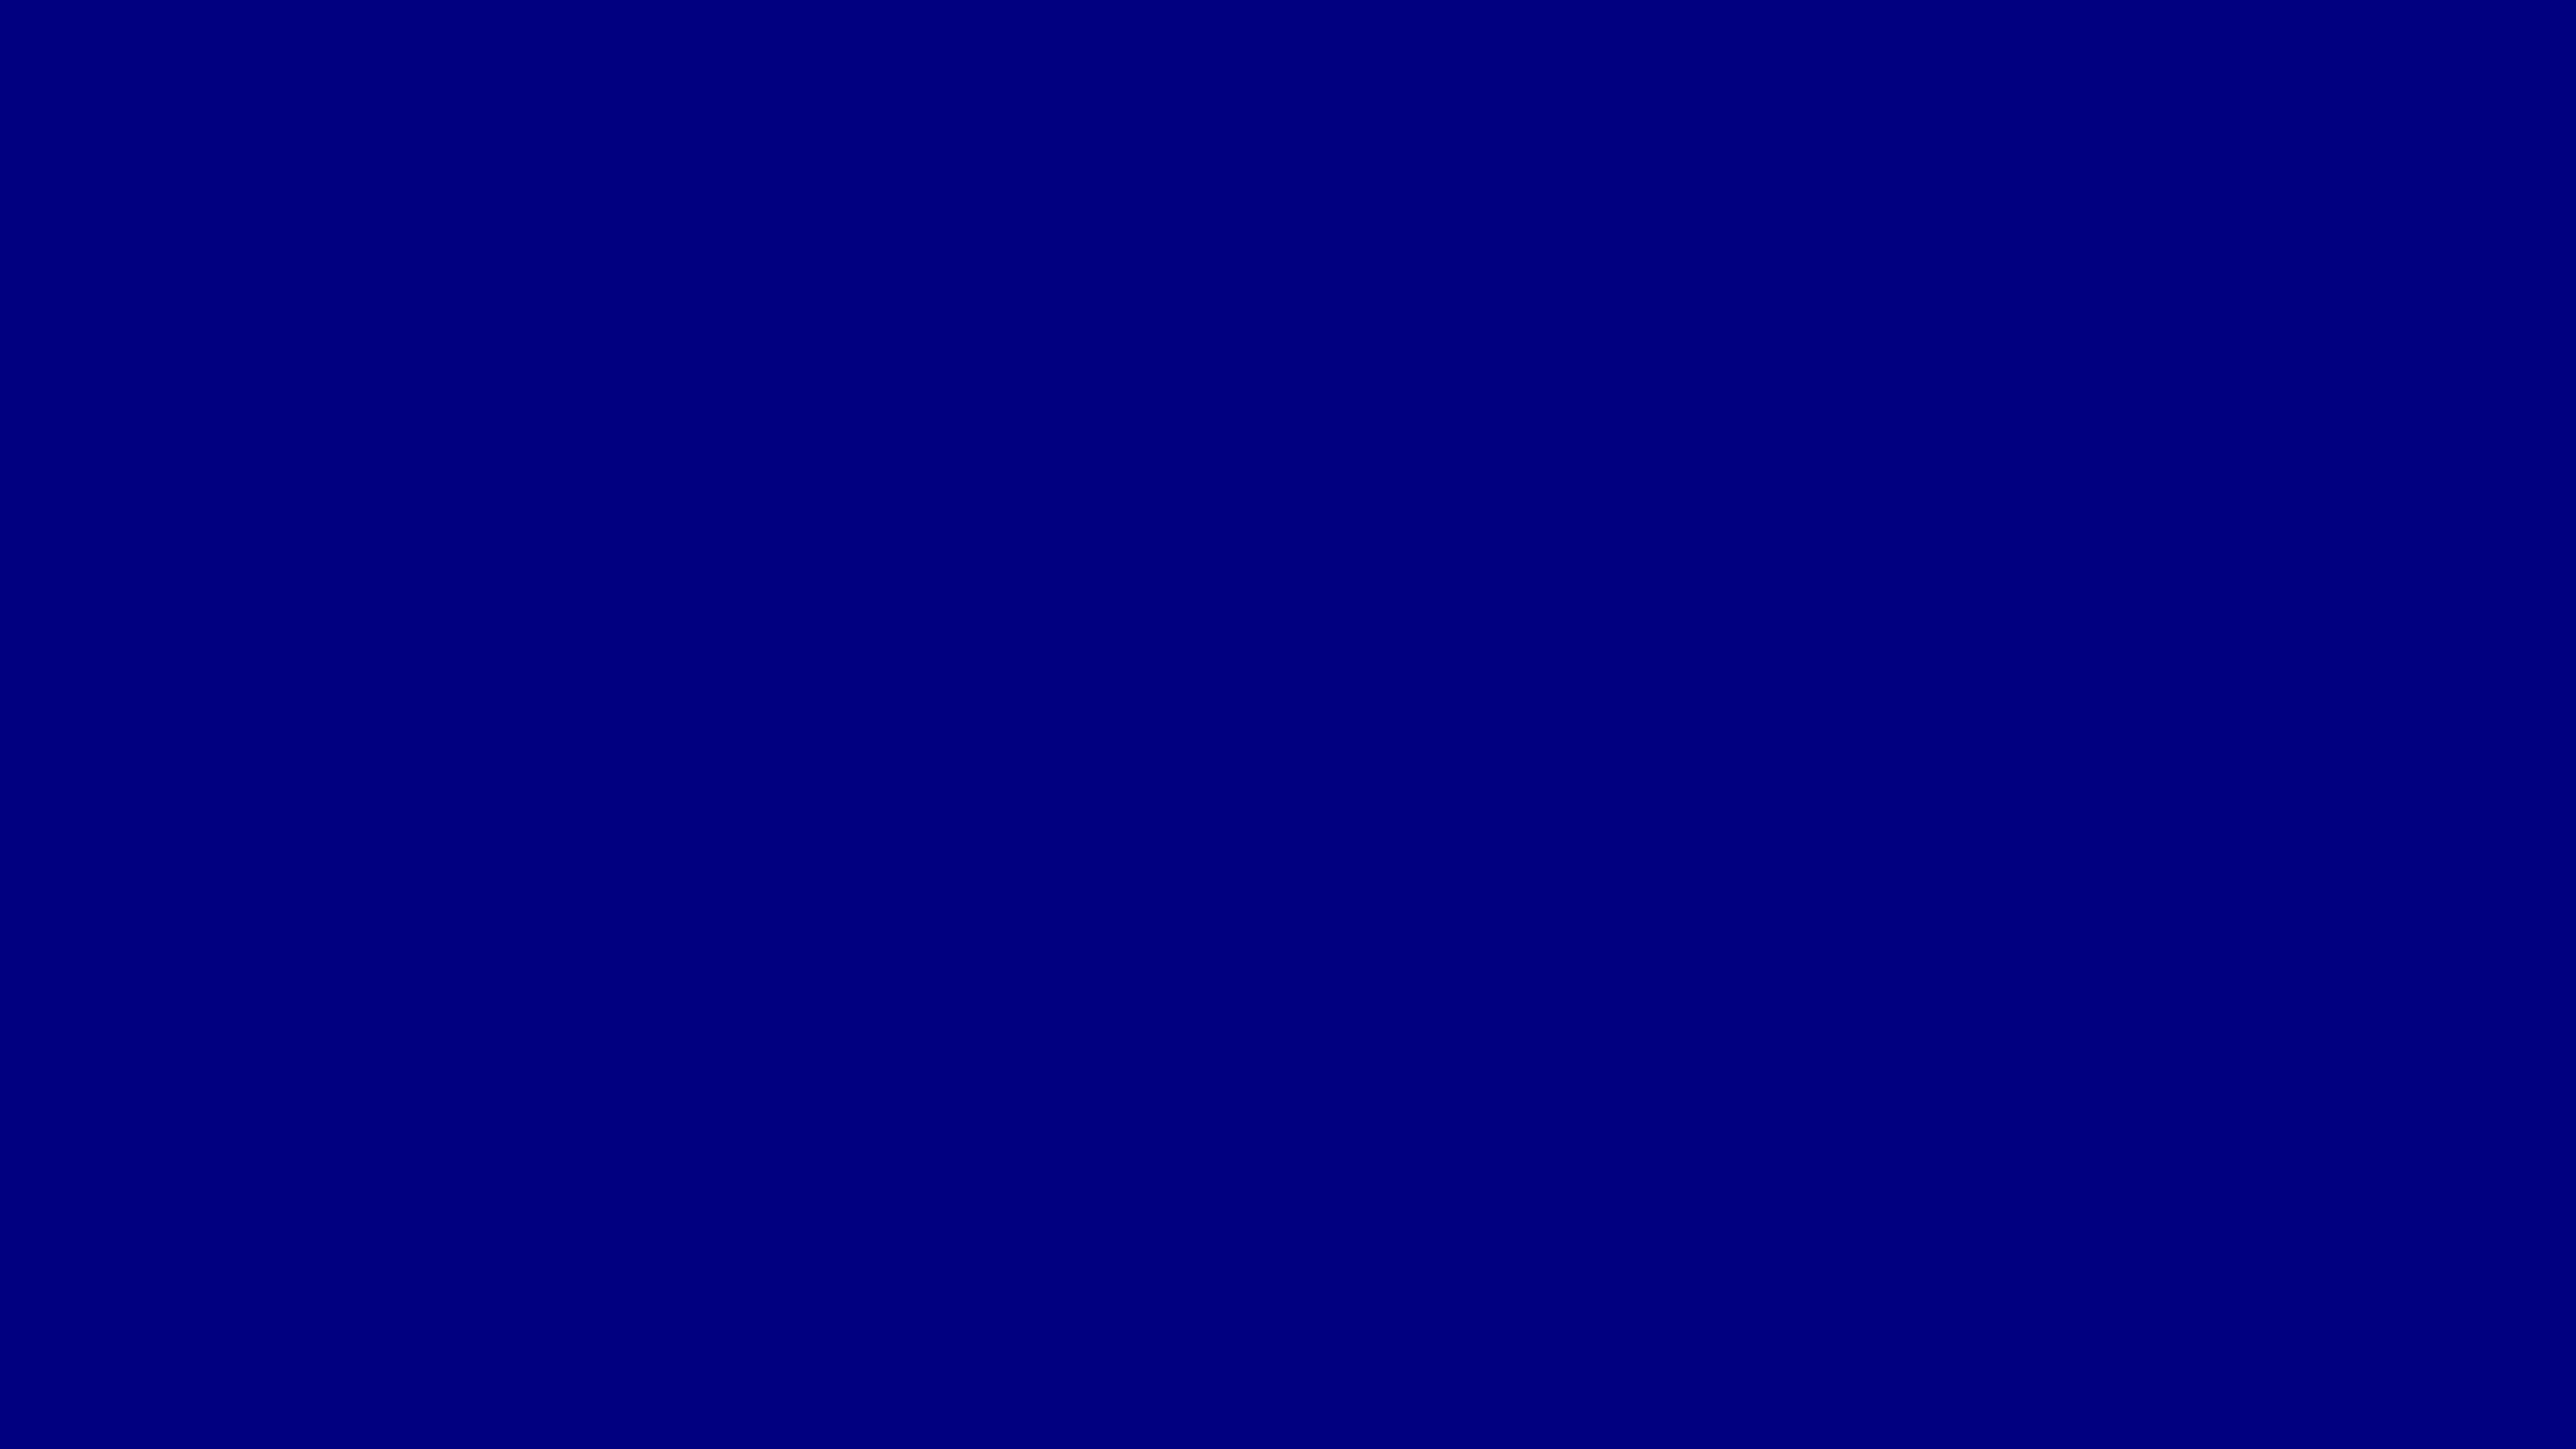 7680x4320 Navy Blue Solid Color Background